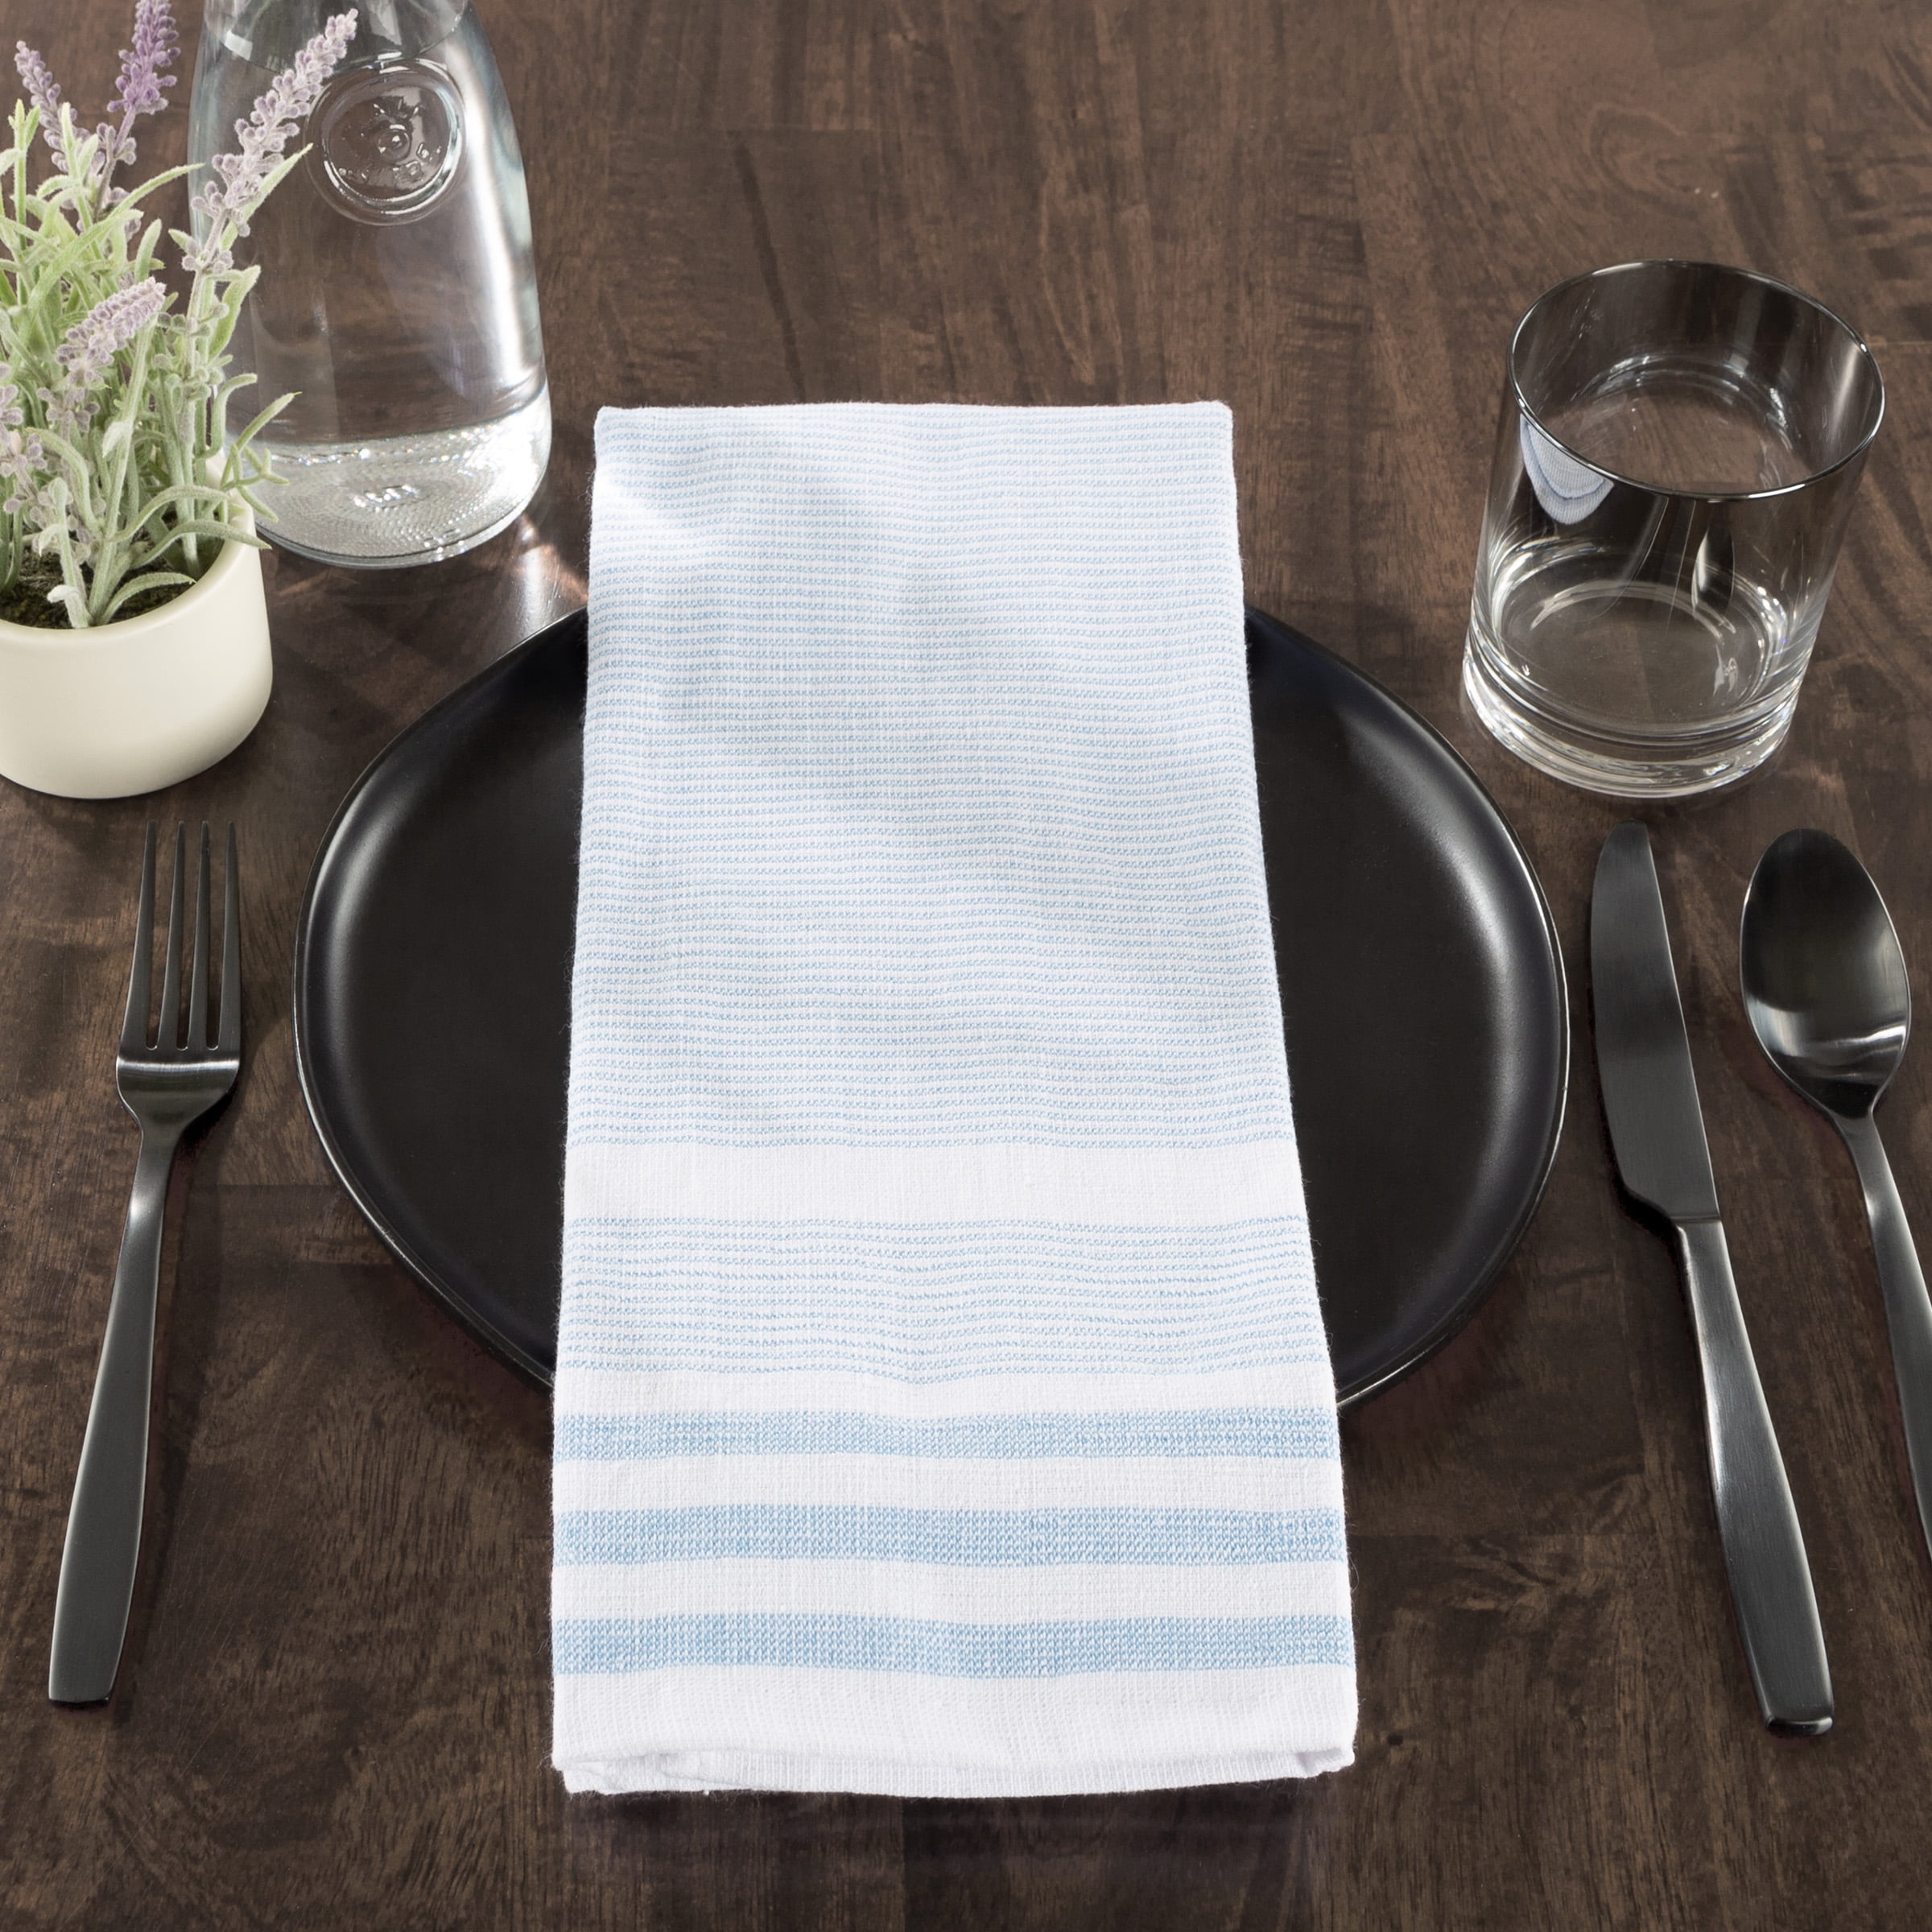 Oeleky Dish Towels for Kitchen 15x26 Inches, Pack of 8 Cotton Kitchen –  SHANULKA Home Decor